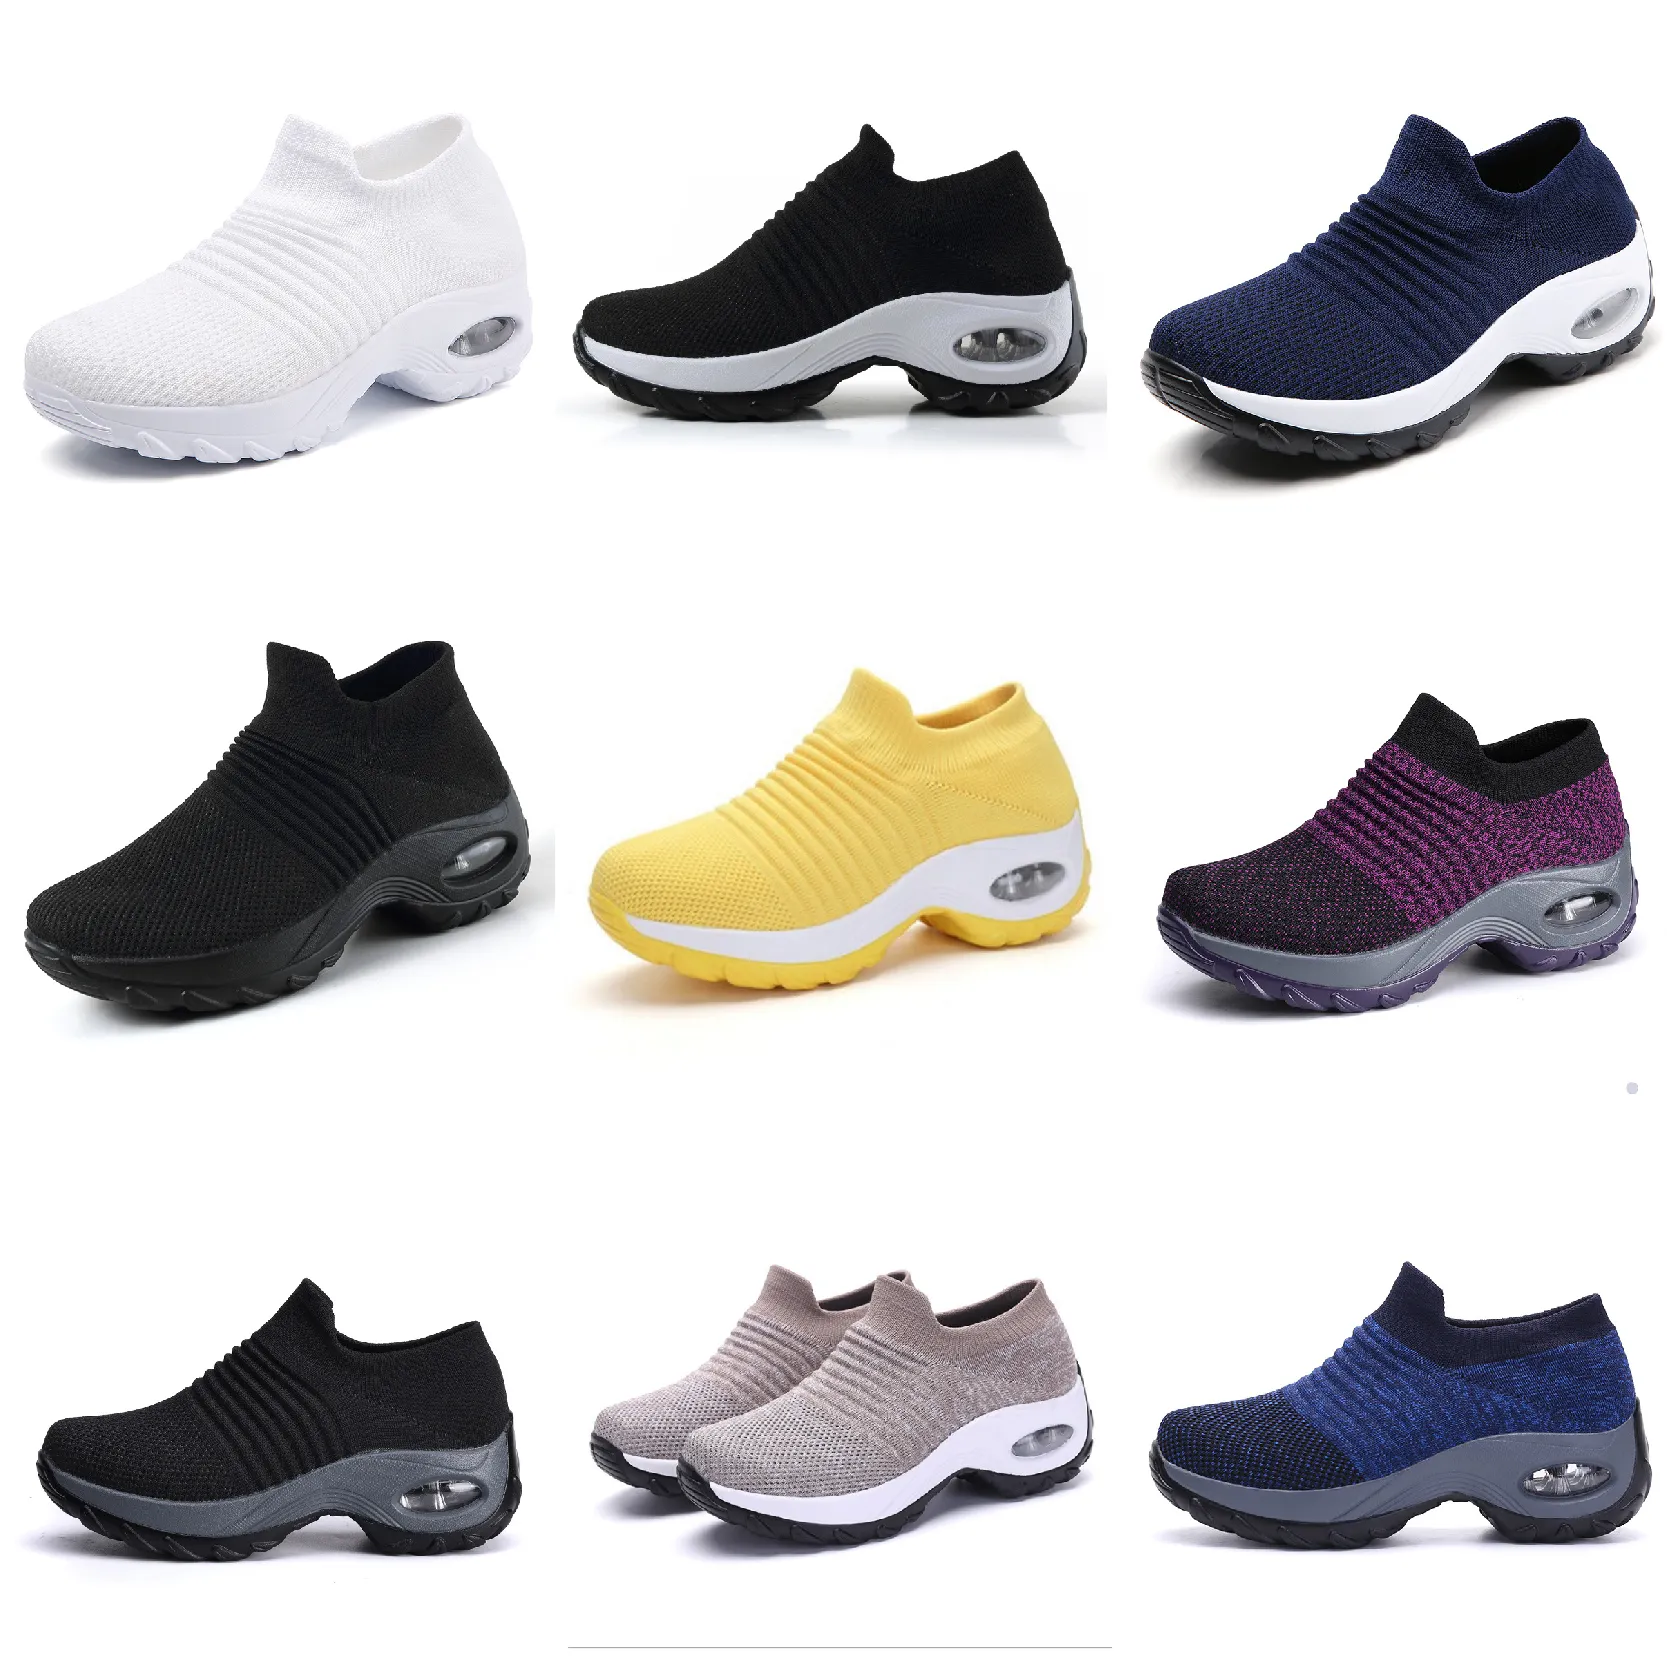 Sports and leisure high elasticity breathable shoes, trendy and fashionable lightweight socks and shoes 22 trendings